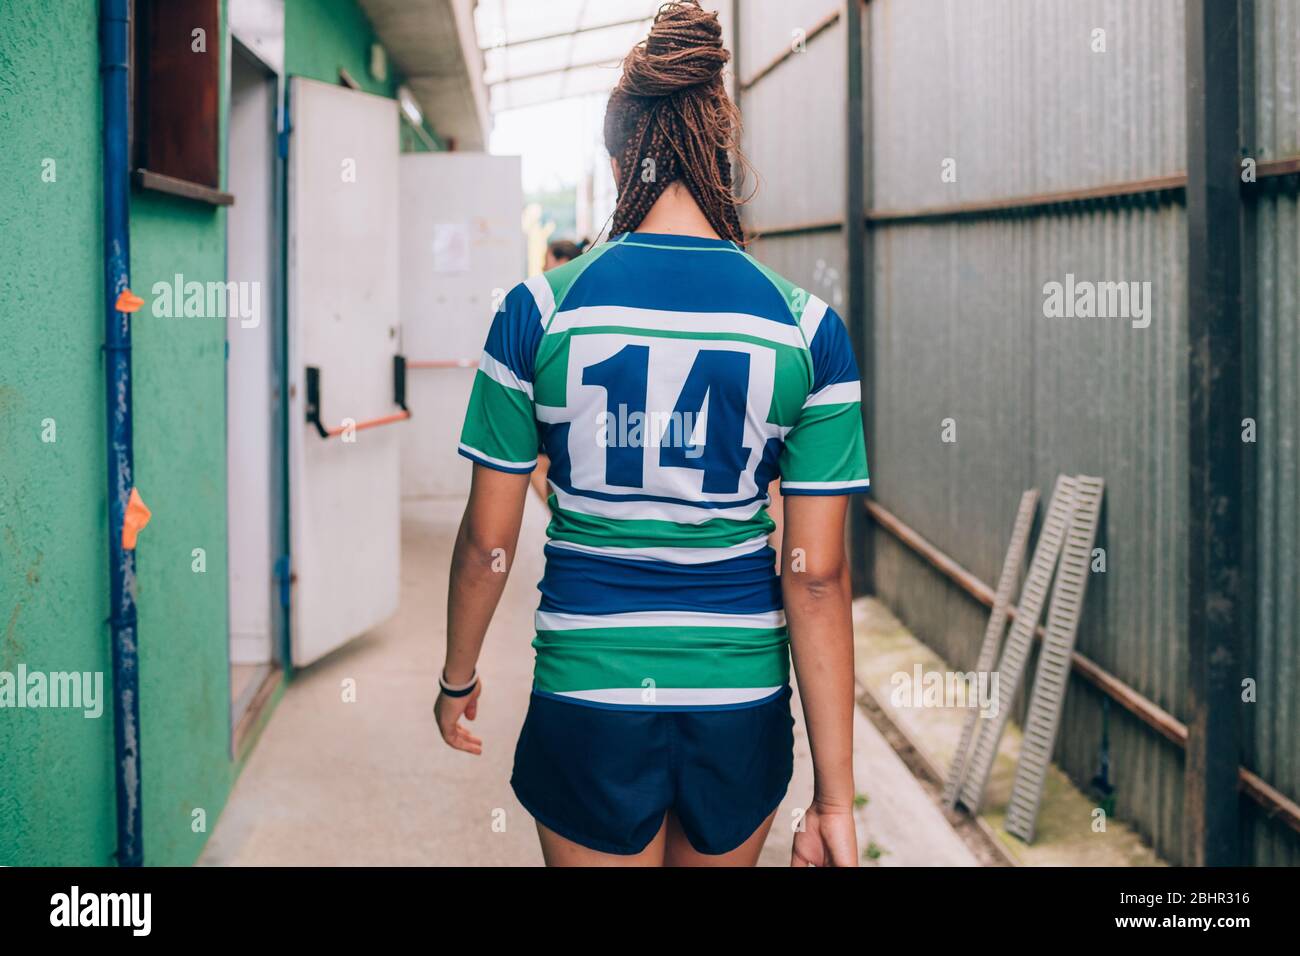 Rear view of a woman wearing a green, blue and white rugby shirt walking towards the dressing rooms. Stock Photo